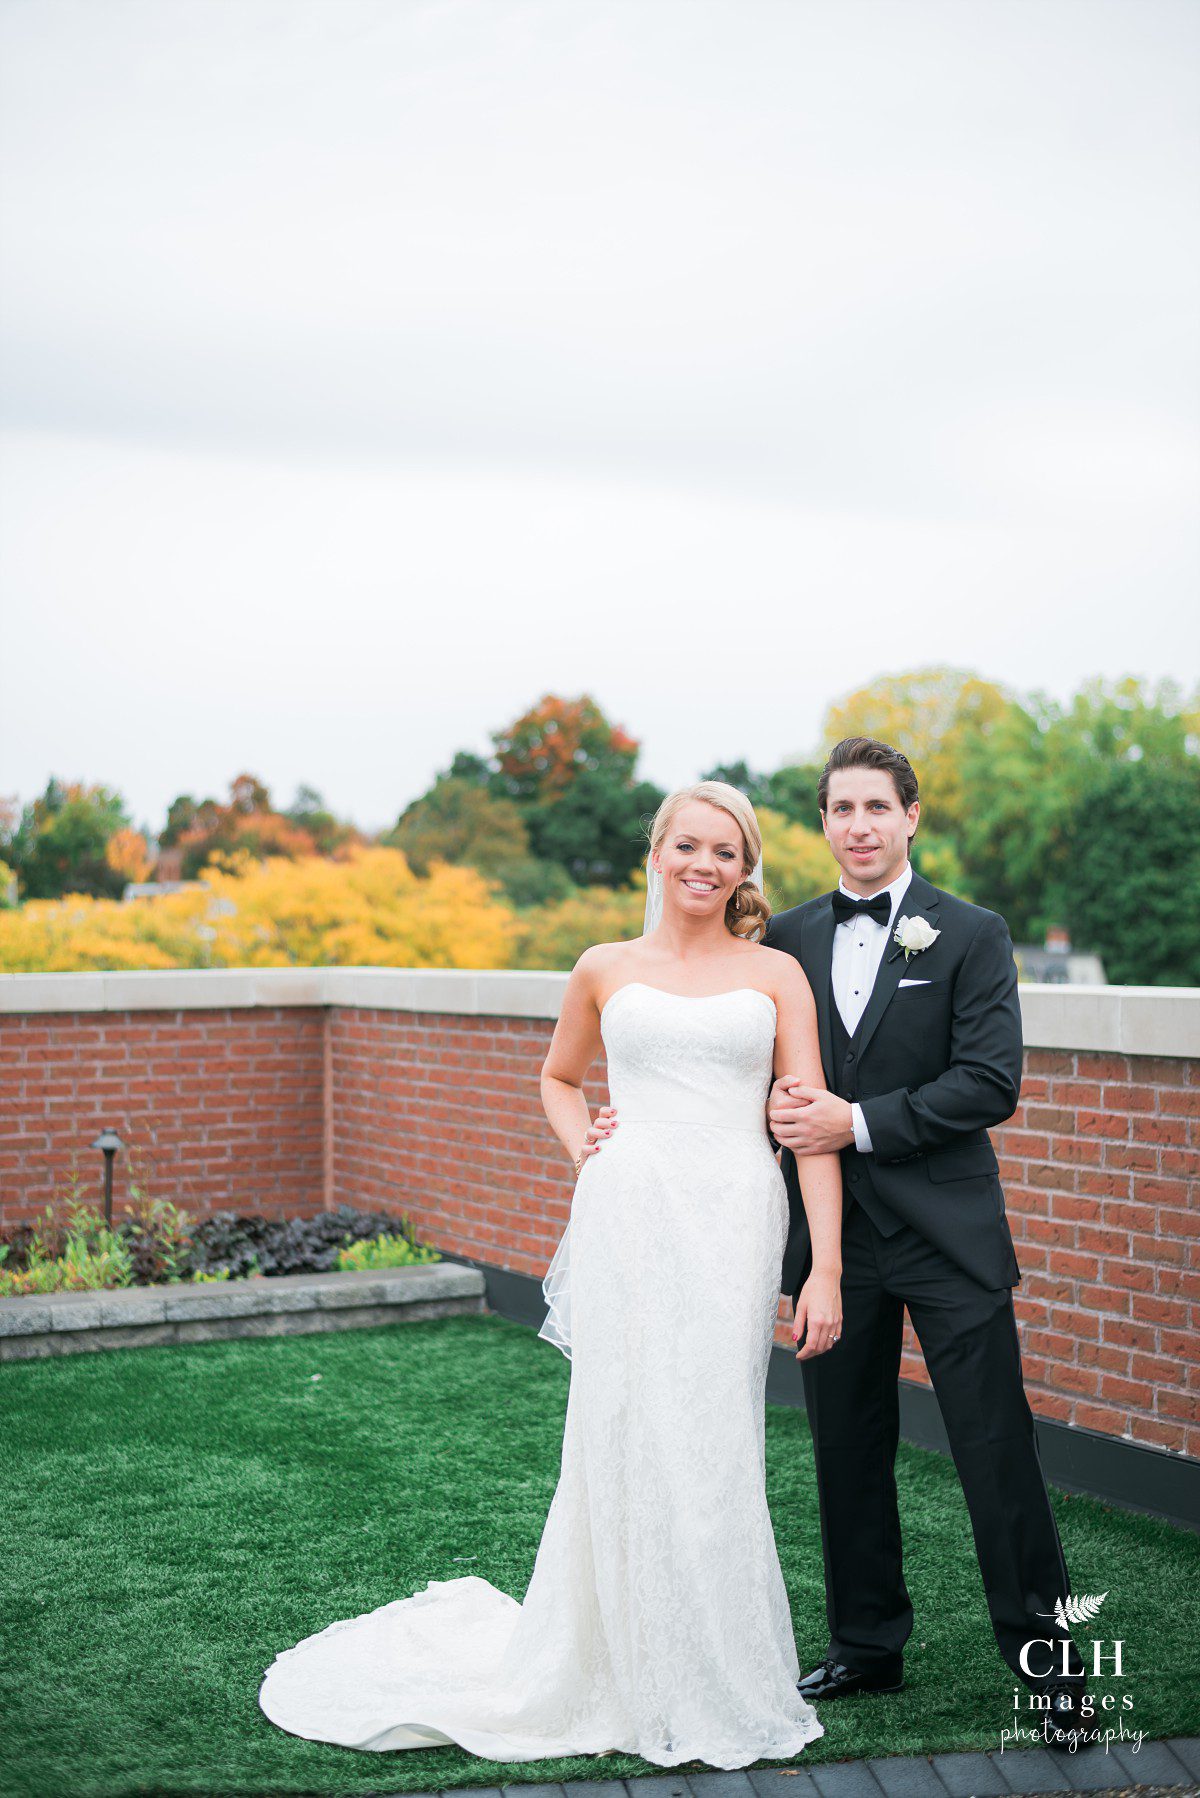 clh-images-photography-canfield-casino-weddings-canfield-casino-wedding-photography-capital-district-wedding-photographer-elise-and-reid-61